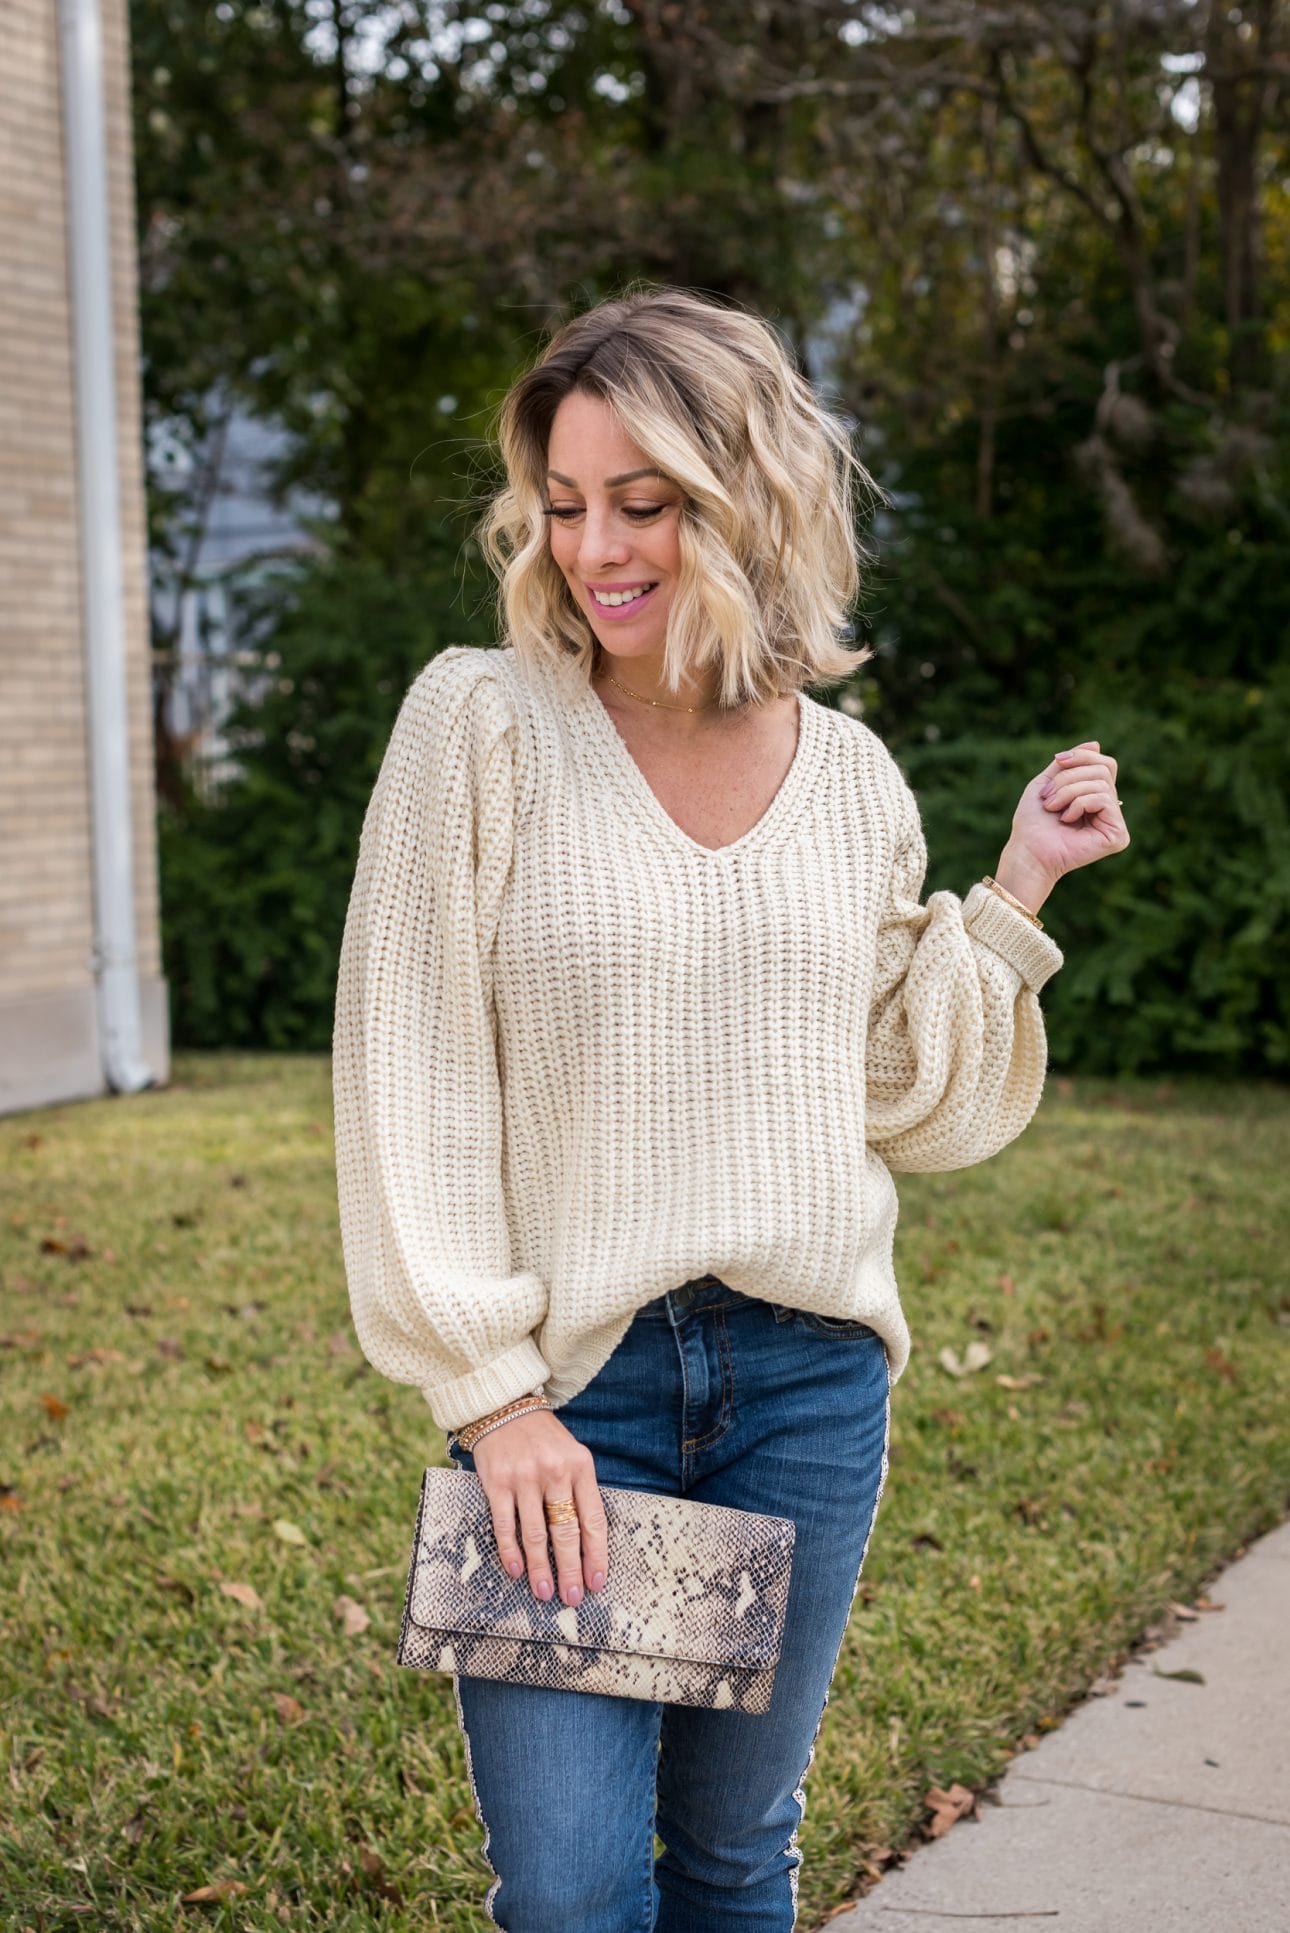 Fall Styles | New Jeans, Sweaters & Jean Jackets – Honey We're Home